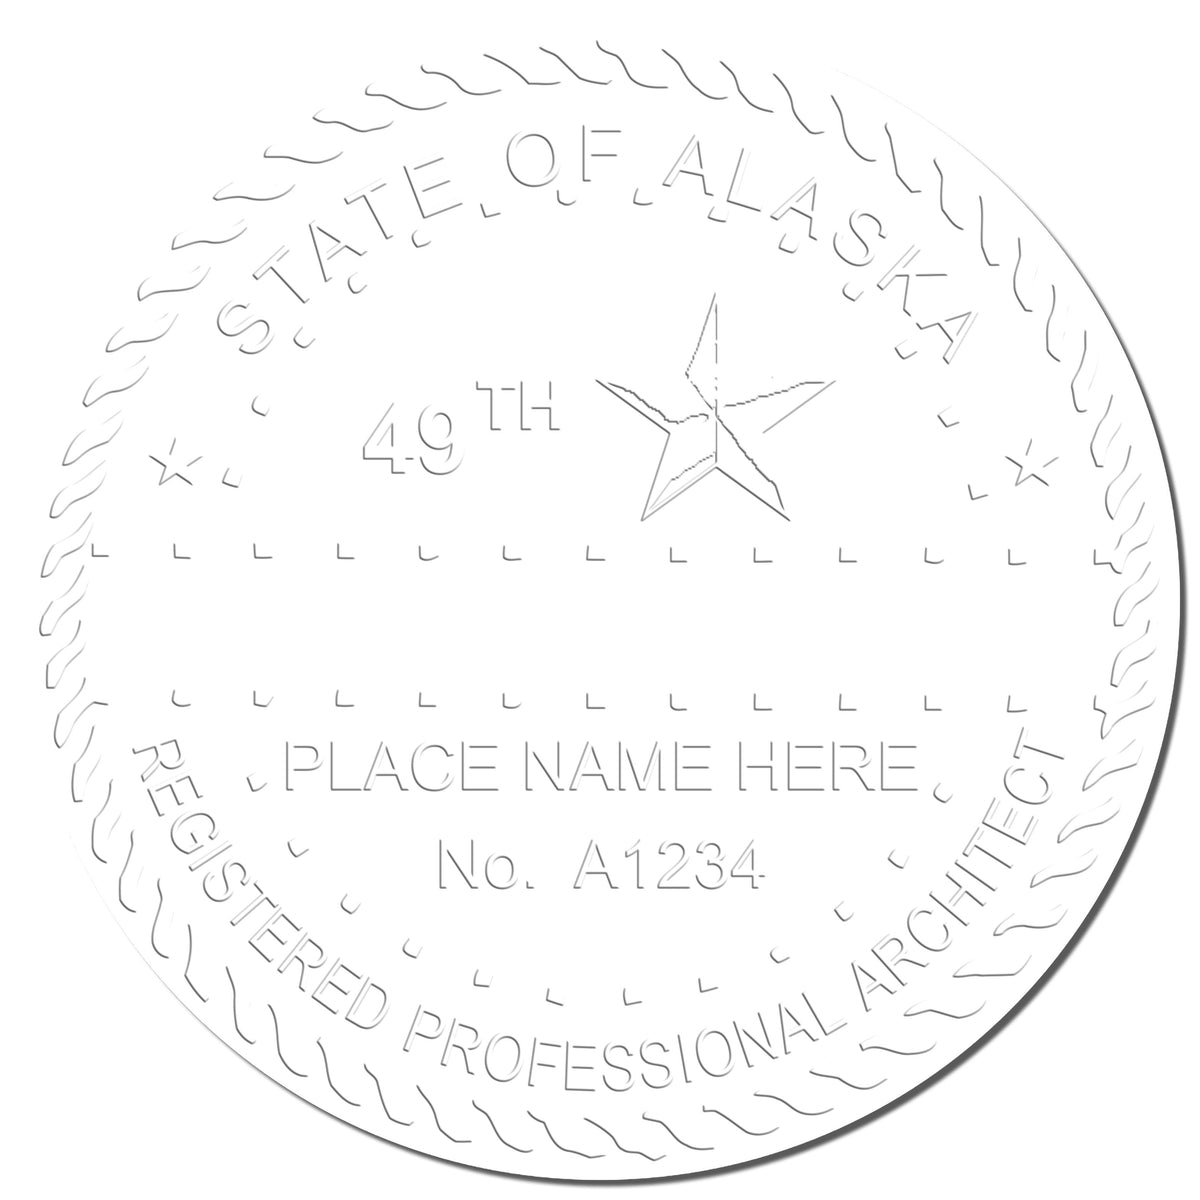 A photograph of the Extended Long Reach Alaska Architect Seal Embosser stamp impression reveals a vivid, professional image of the on paper.